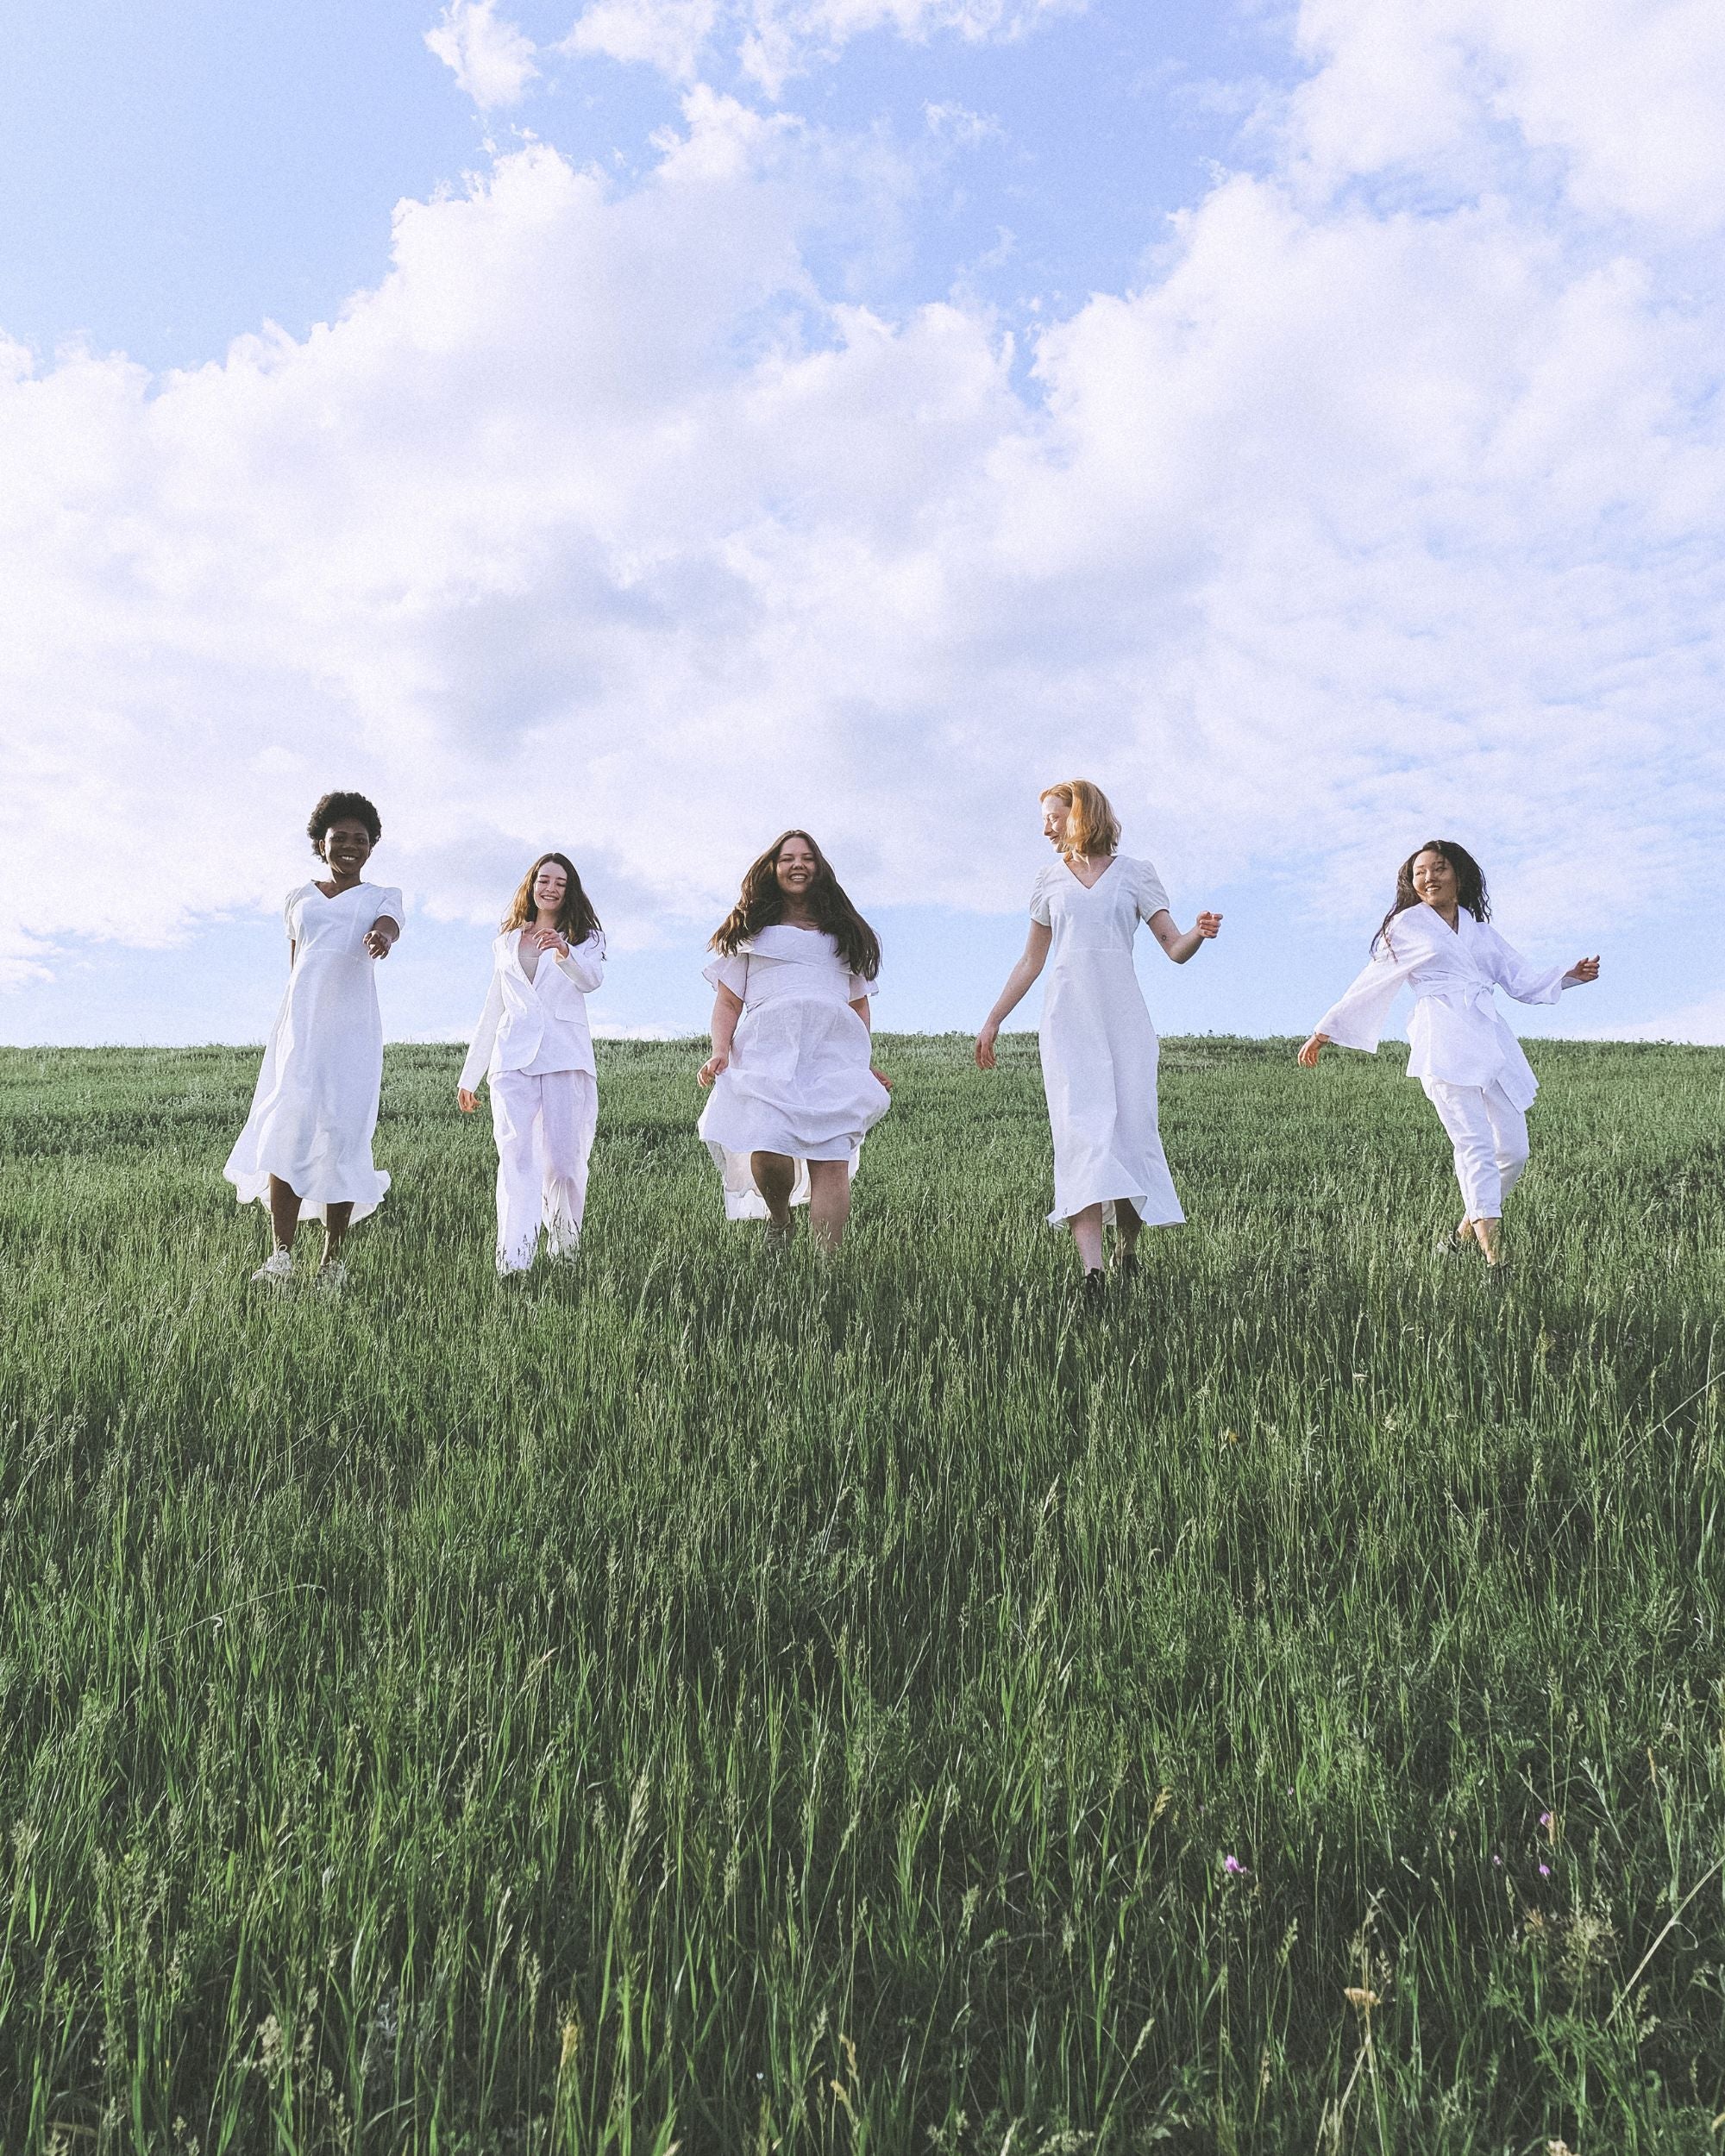 Diverse Women Running Down a green hill in white clothing